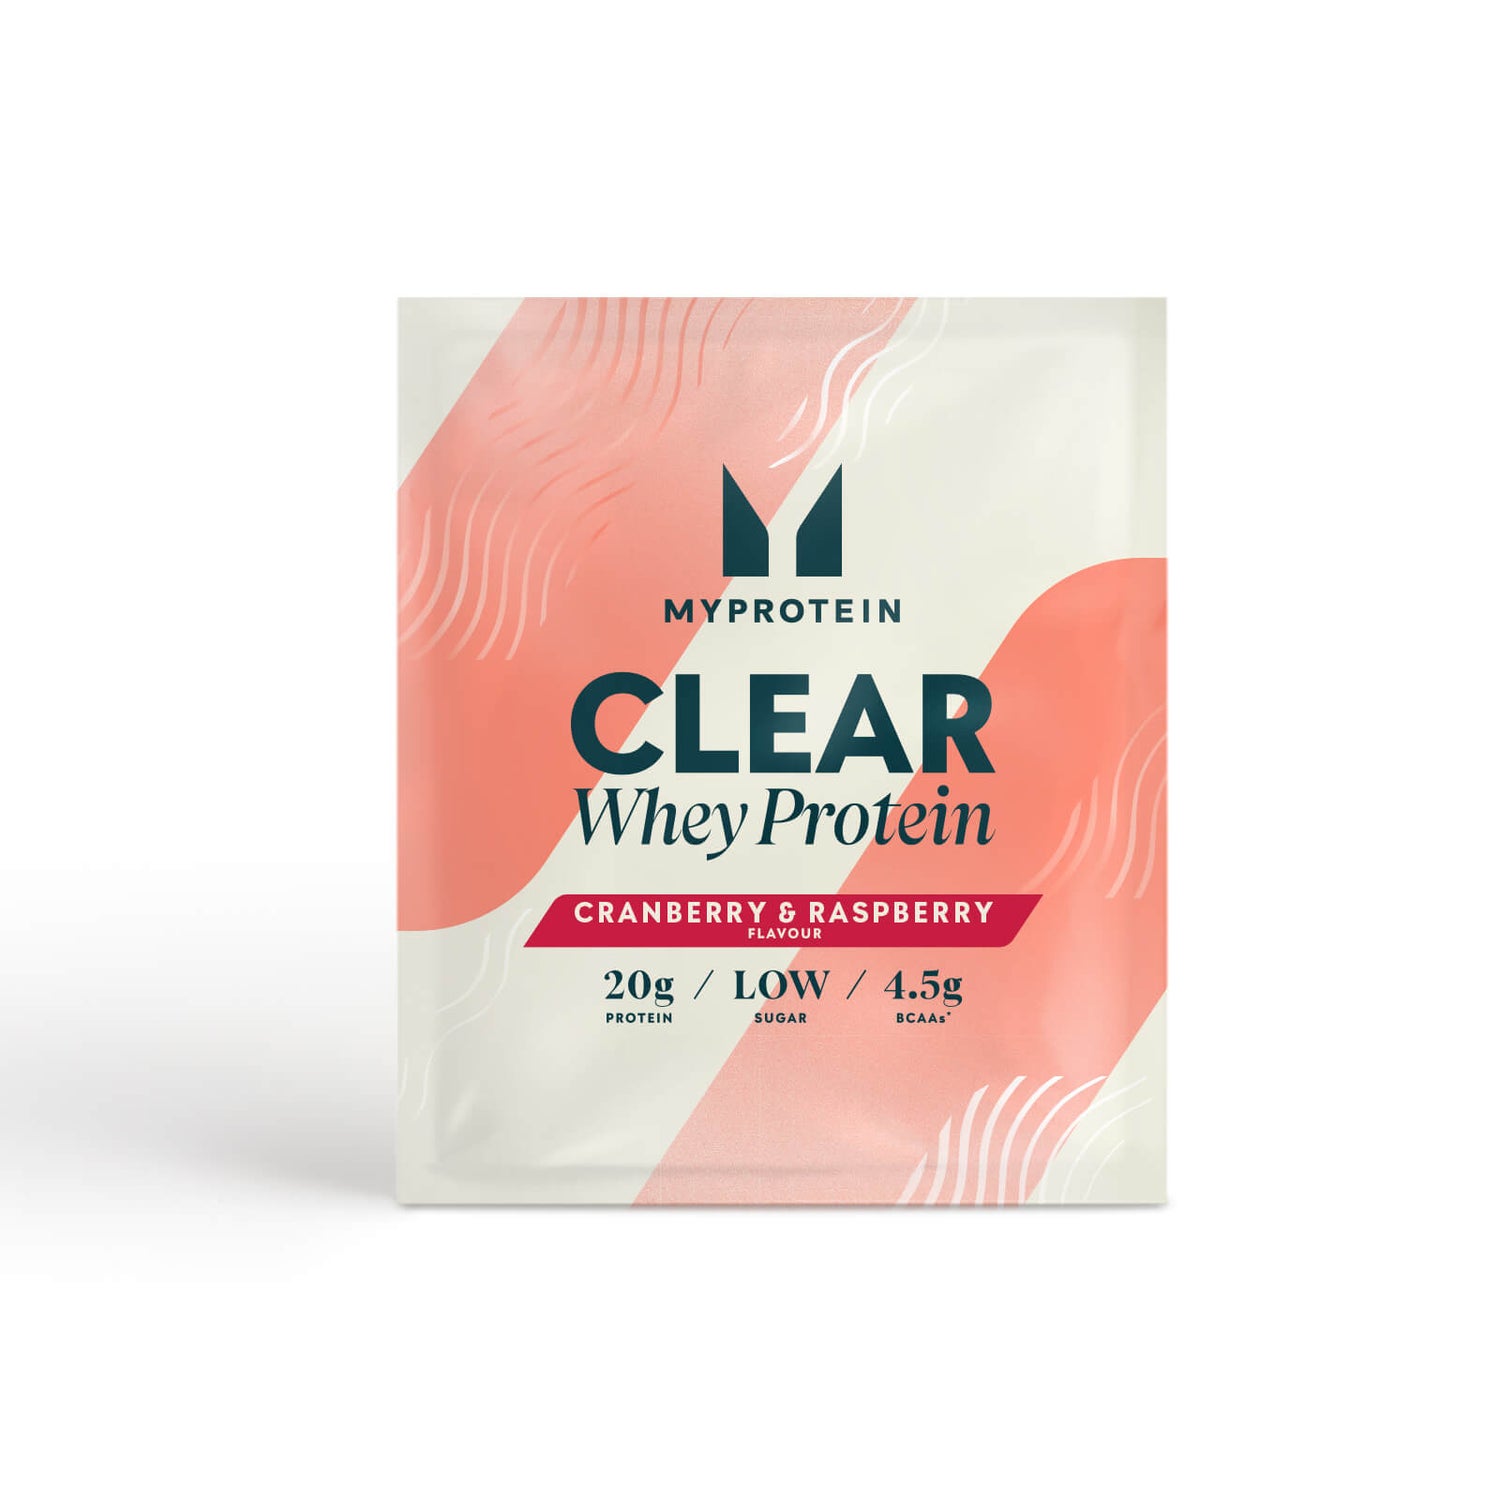 Clear Whey Protein (Sample) - 1servings - Cranberry & Raspberry